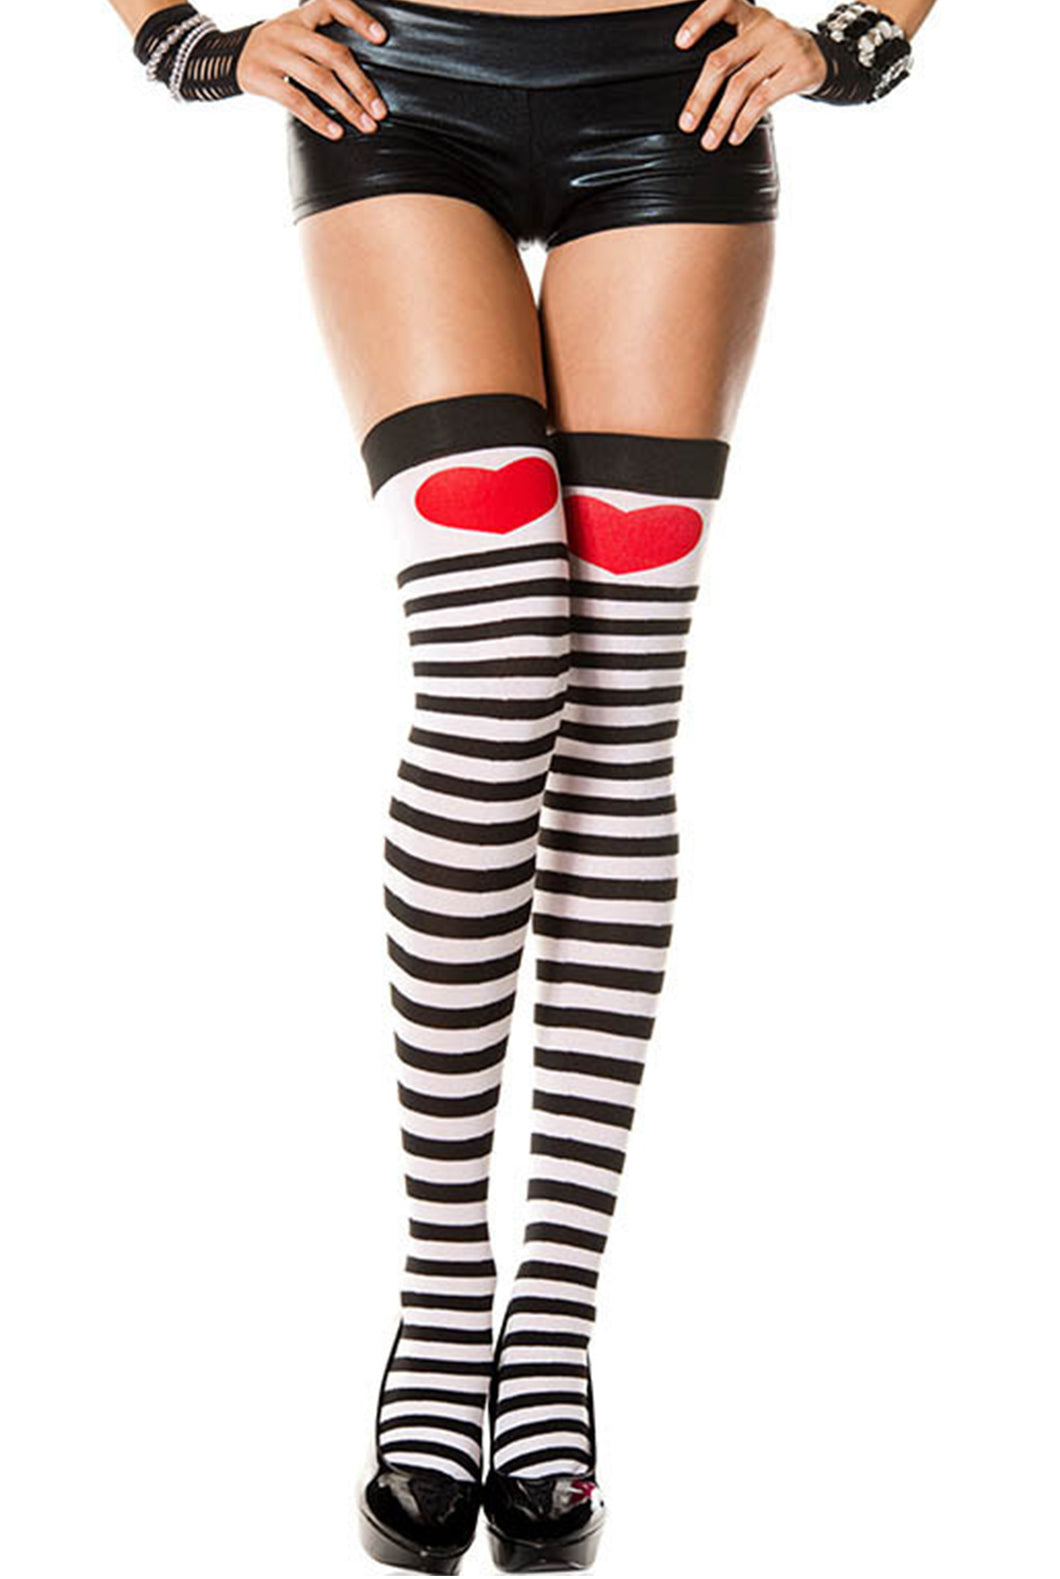 Striped Thigh High with Huge Heart